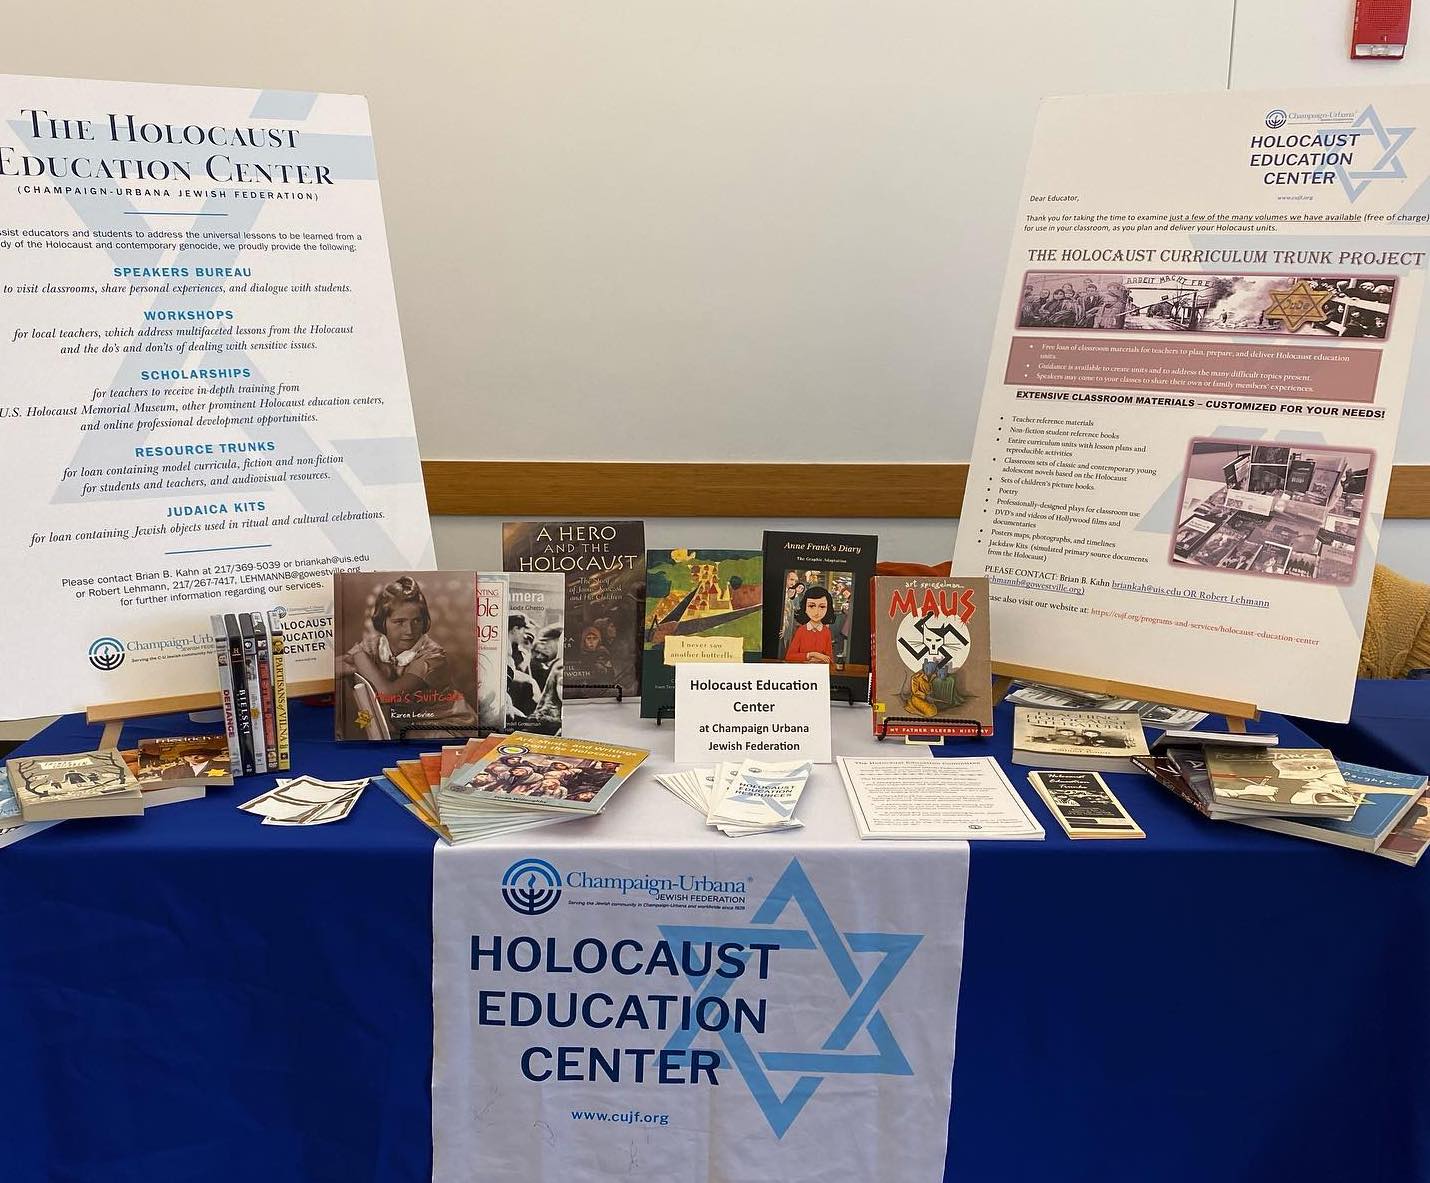 A blue display table. There is a sign hanging on the front saying "Holocaust Education Center." On the table are two large information posters, and various books including "Maus" and "Anne Frank's Diary," amongst others.